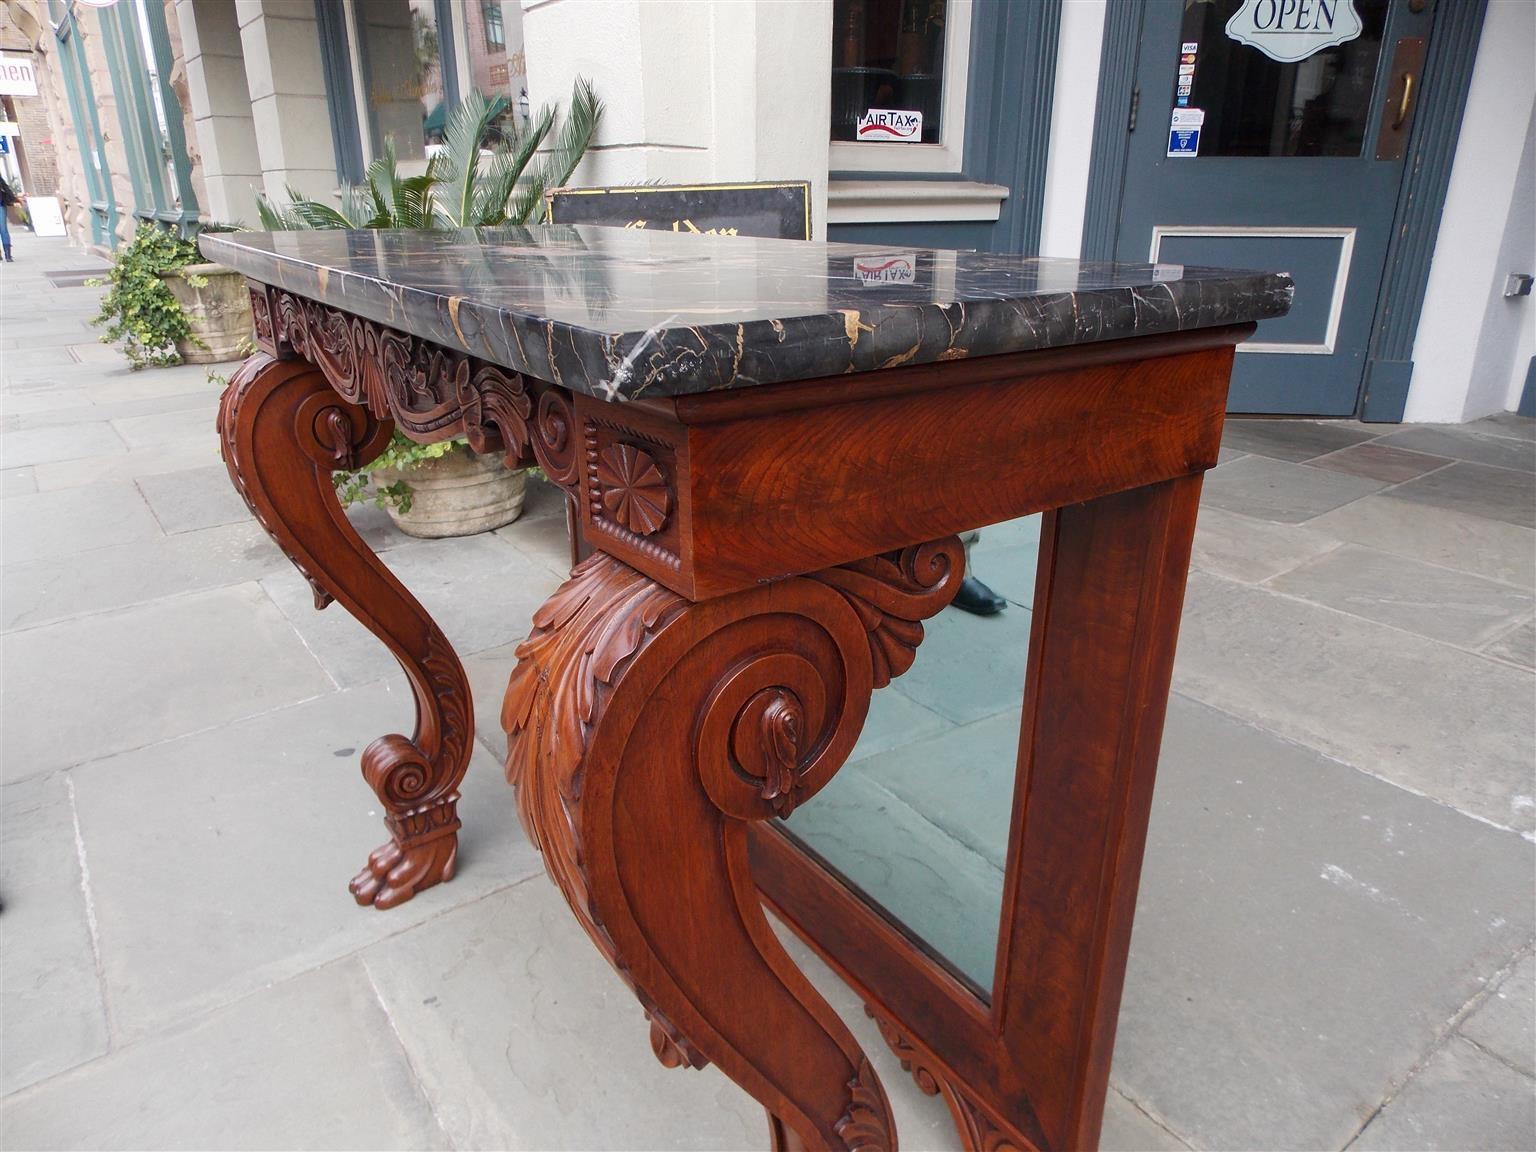 Mid-19th Century American Mahogany Acanthus Mable-Top Console, Isaac Vose, Boston, Circa 1830 For Sale